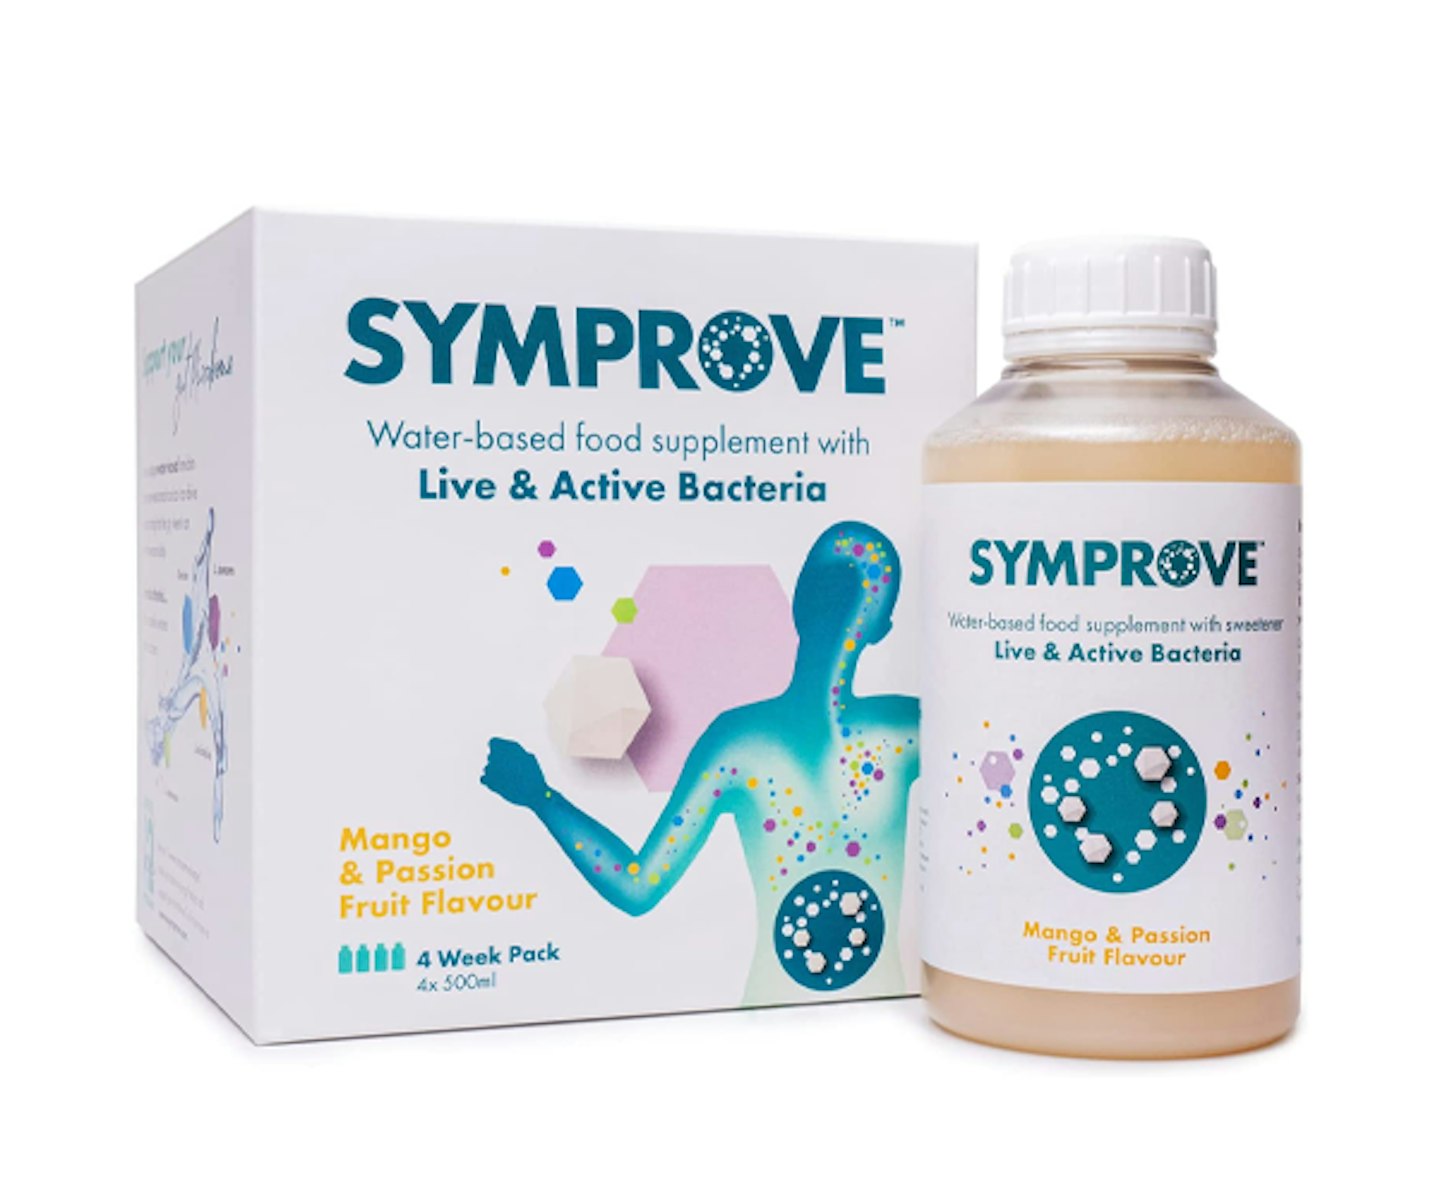 Symprove Daily Food Supplement